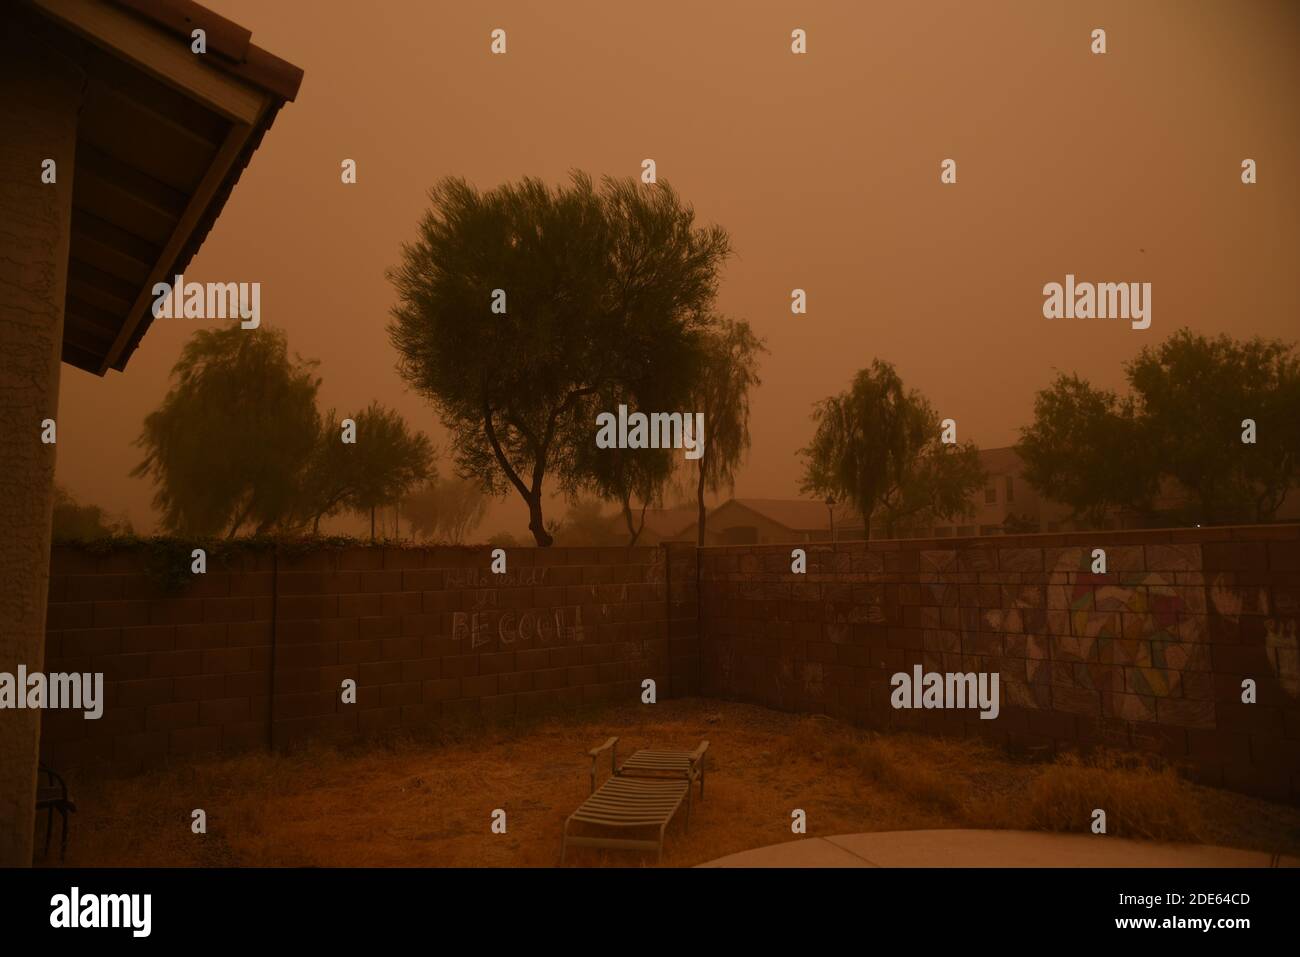 Arizona Dust storm blowing over a yard Stock Photo